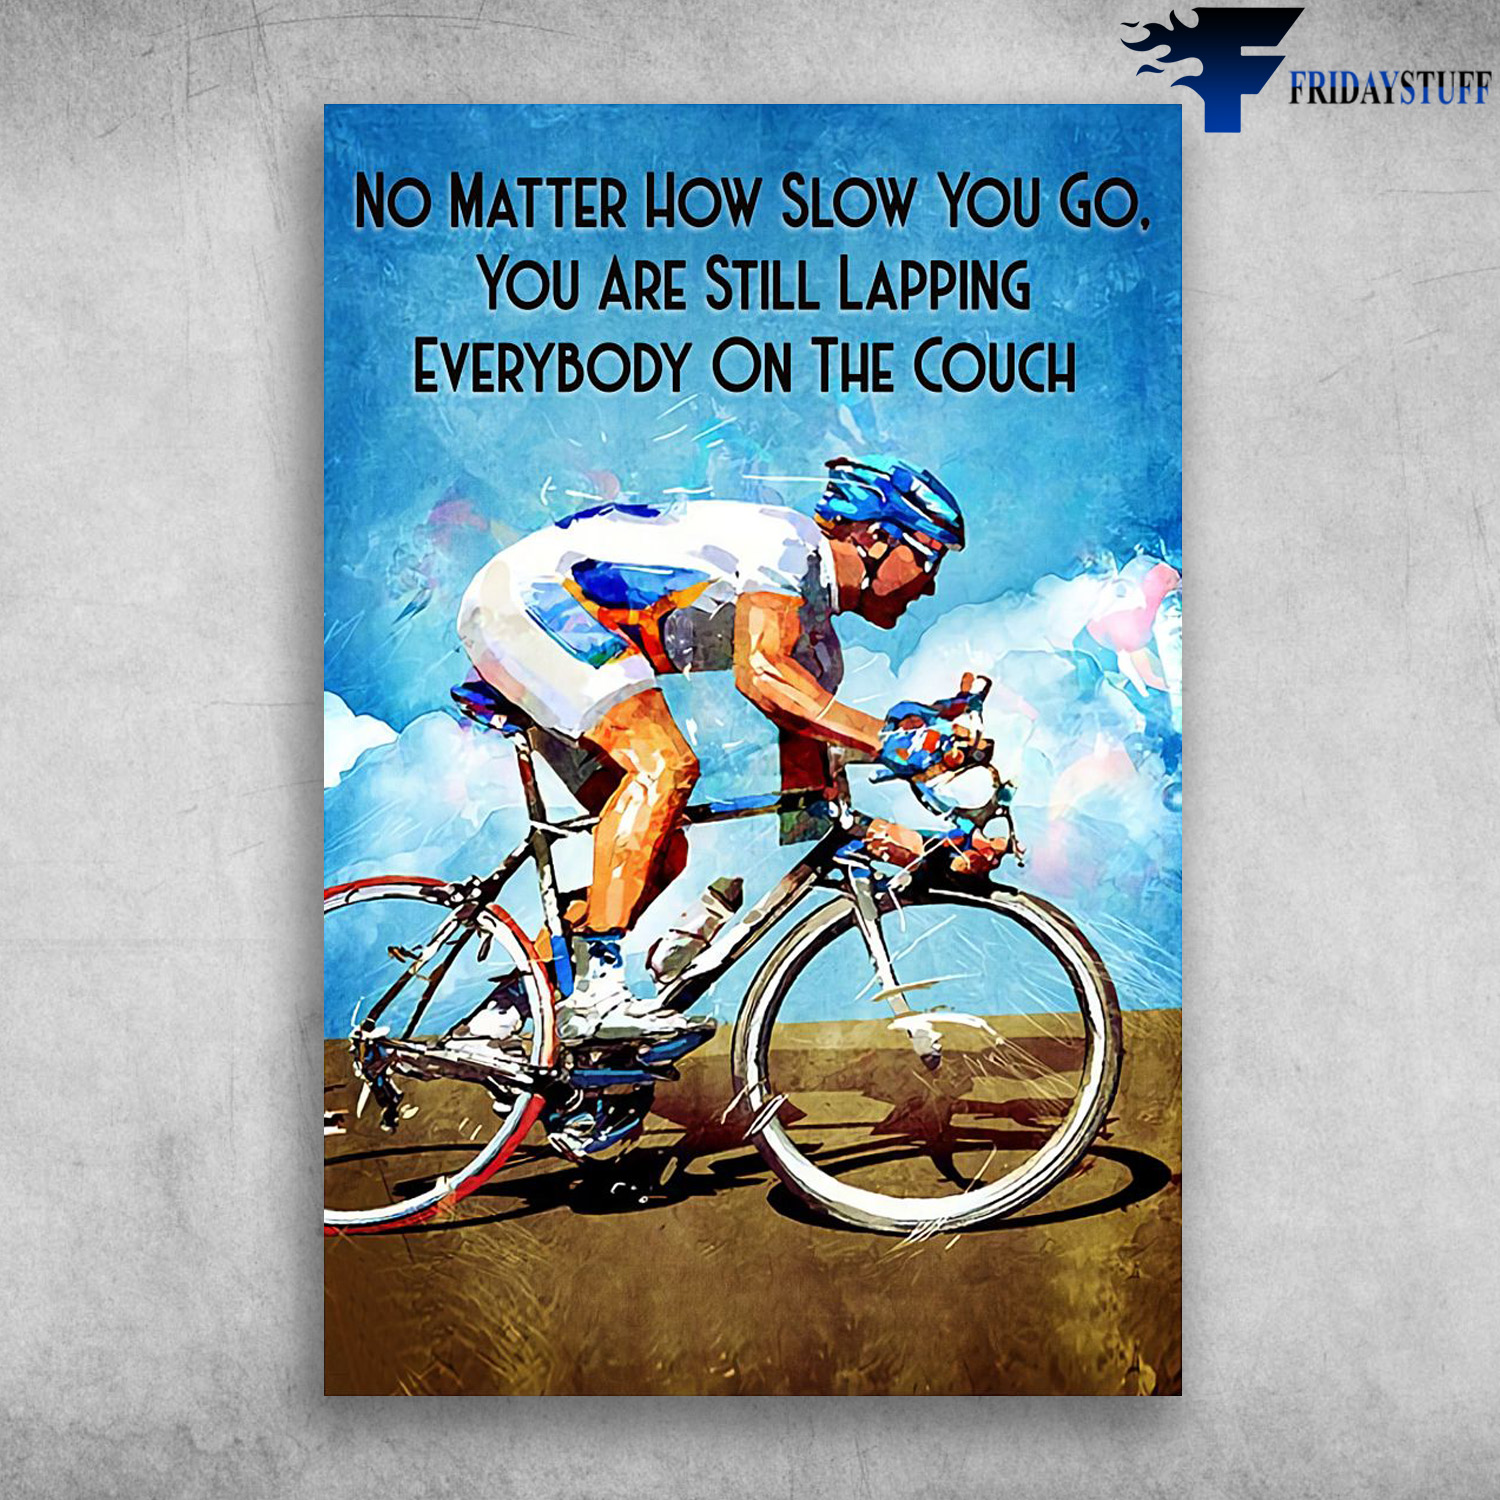 Man Riding Bicycle - No Matter How Slow You Go, You Are Still Lapping Everybody On The Couch